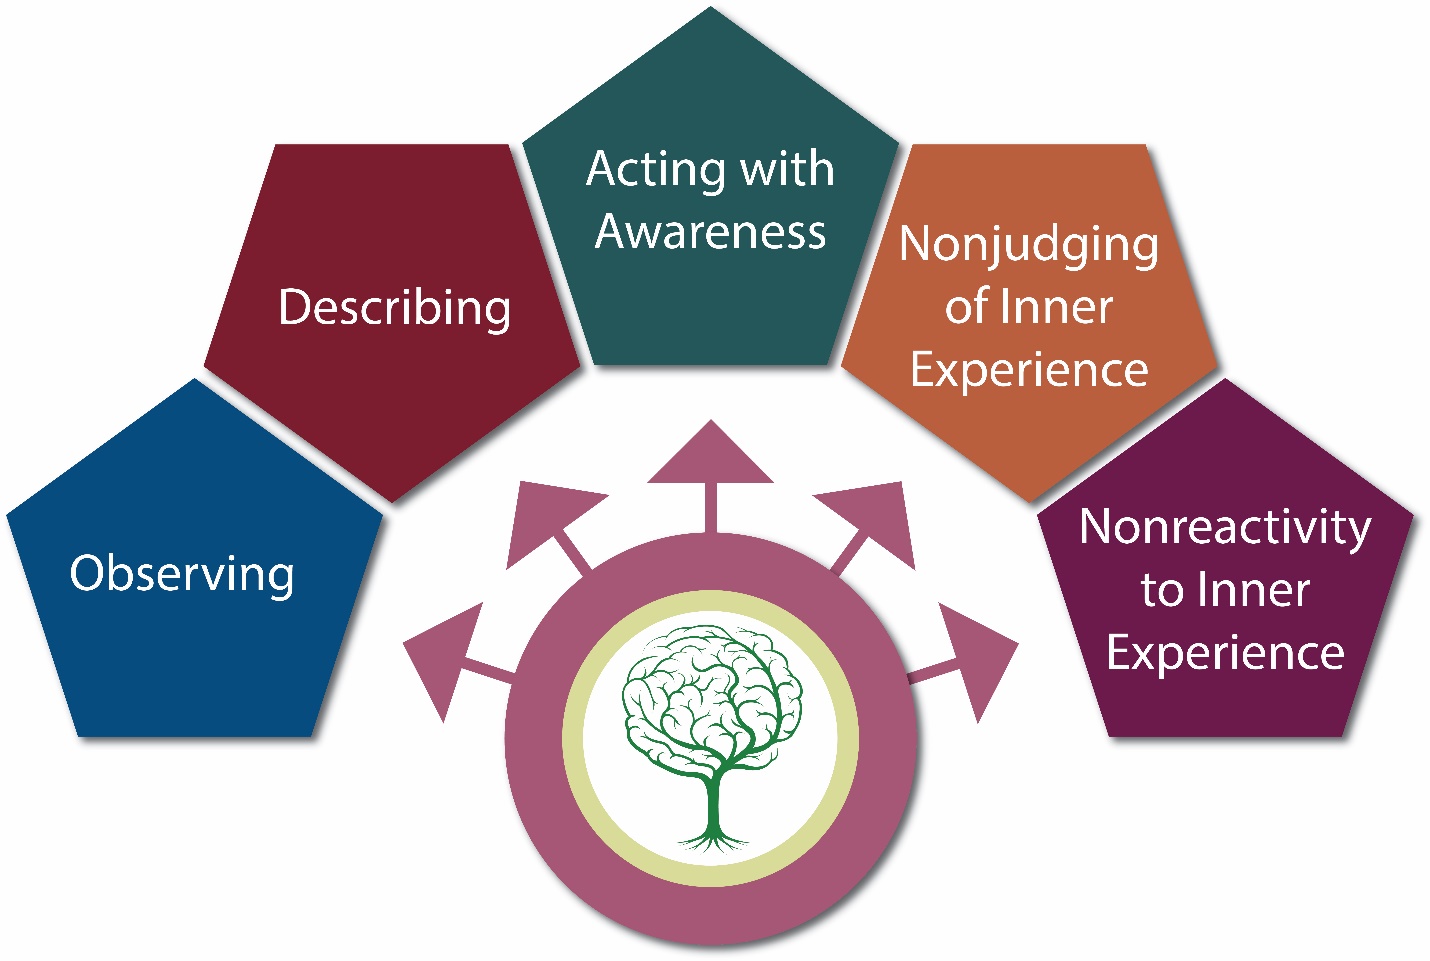 Observing, Describing, Acting with awareness, nonjudging of inner experience, and nonreactivity to inner experience.